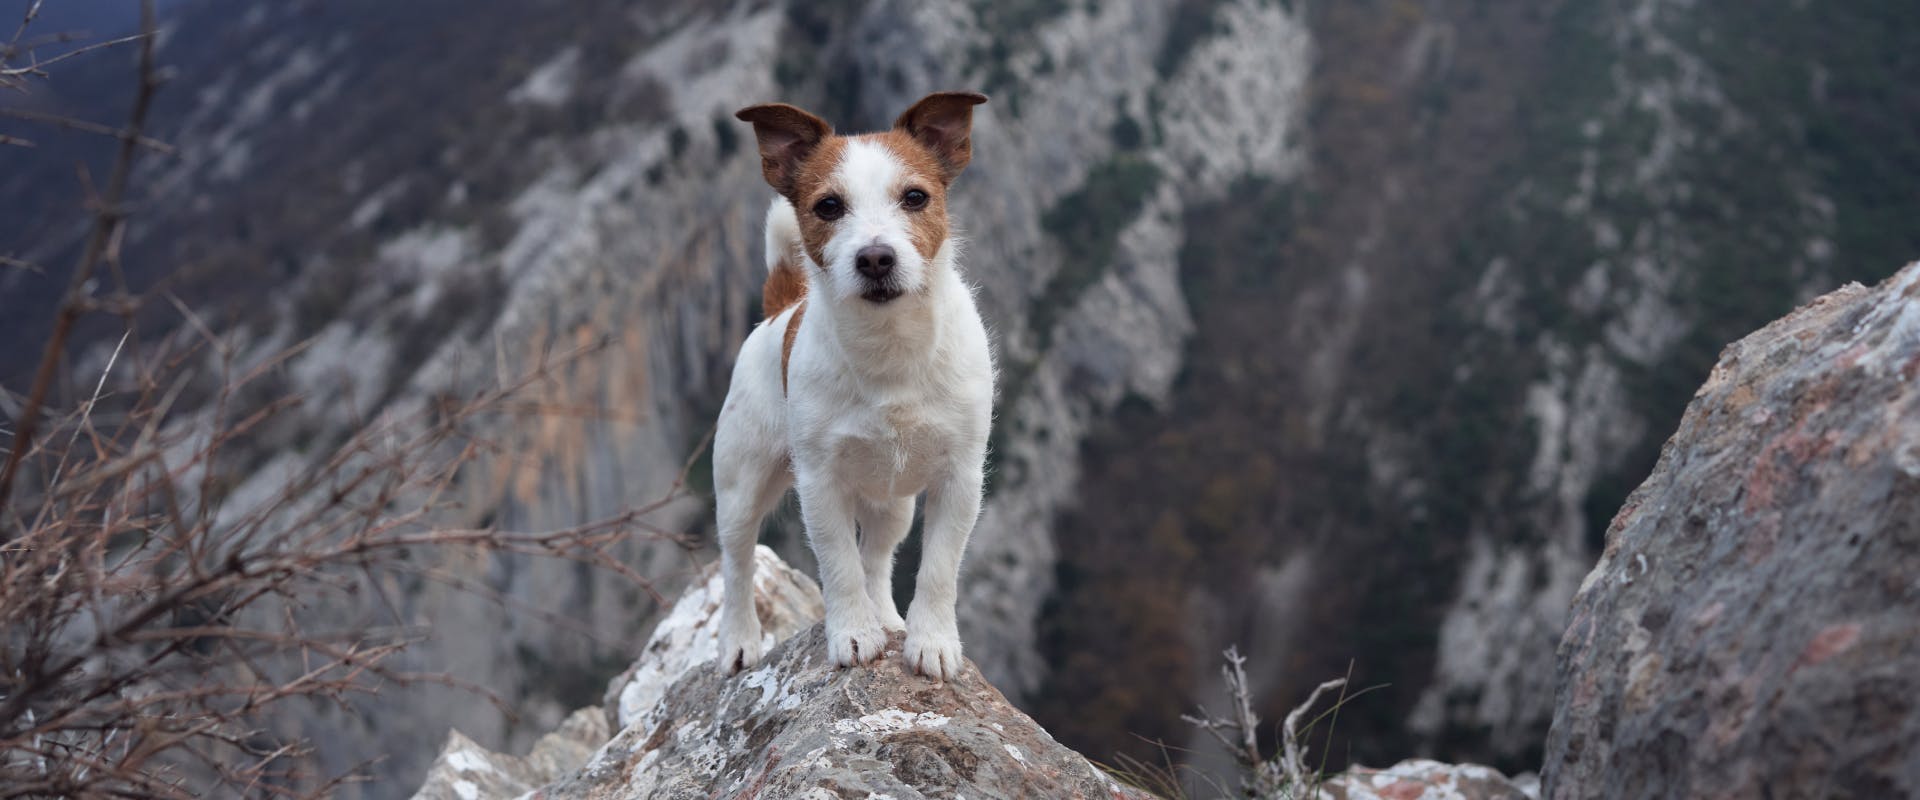 A dog stands on a rock in the mountains.